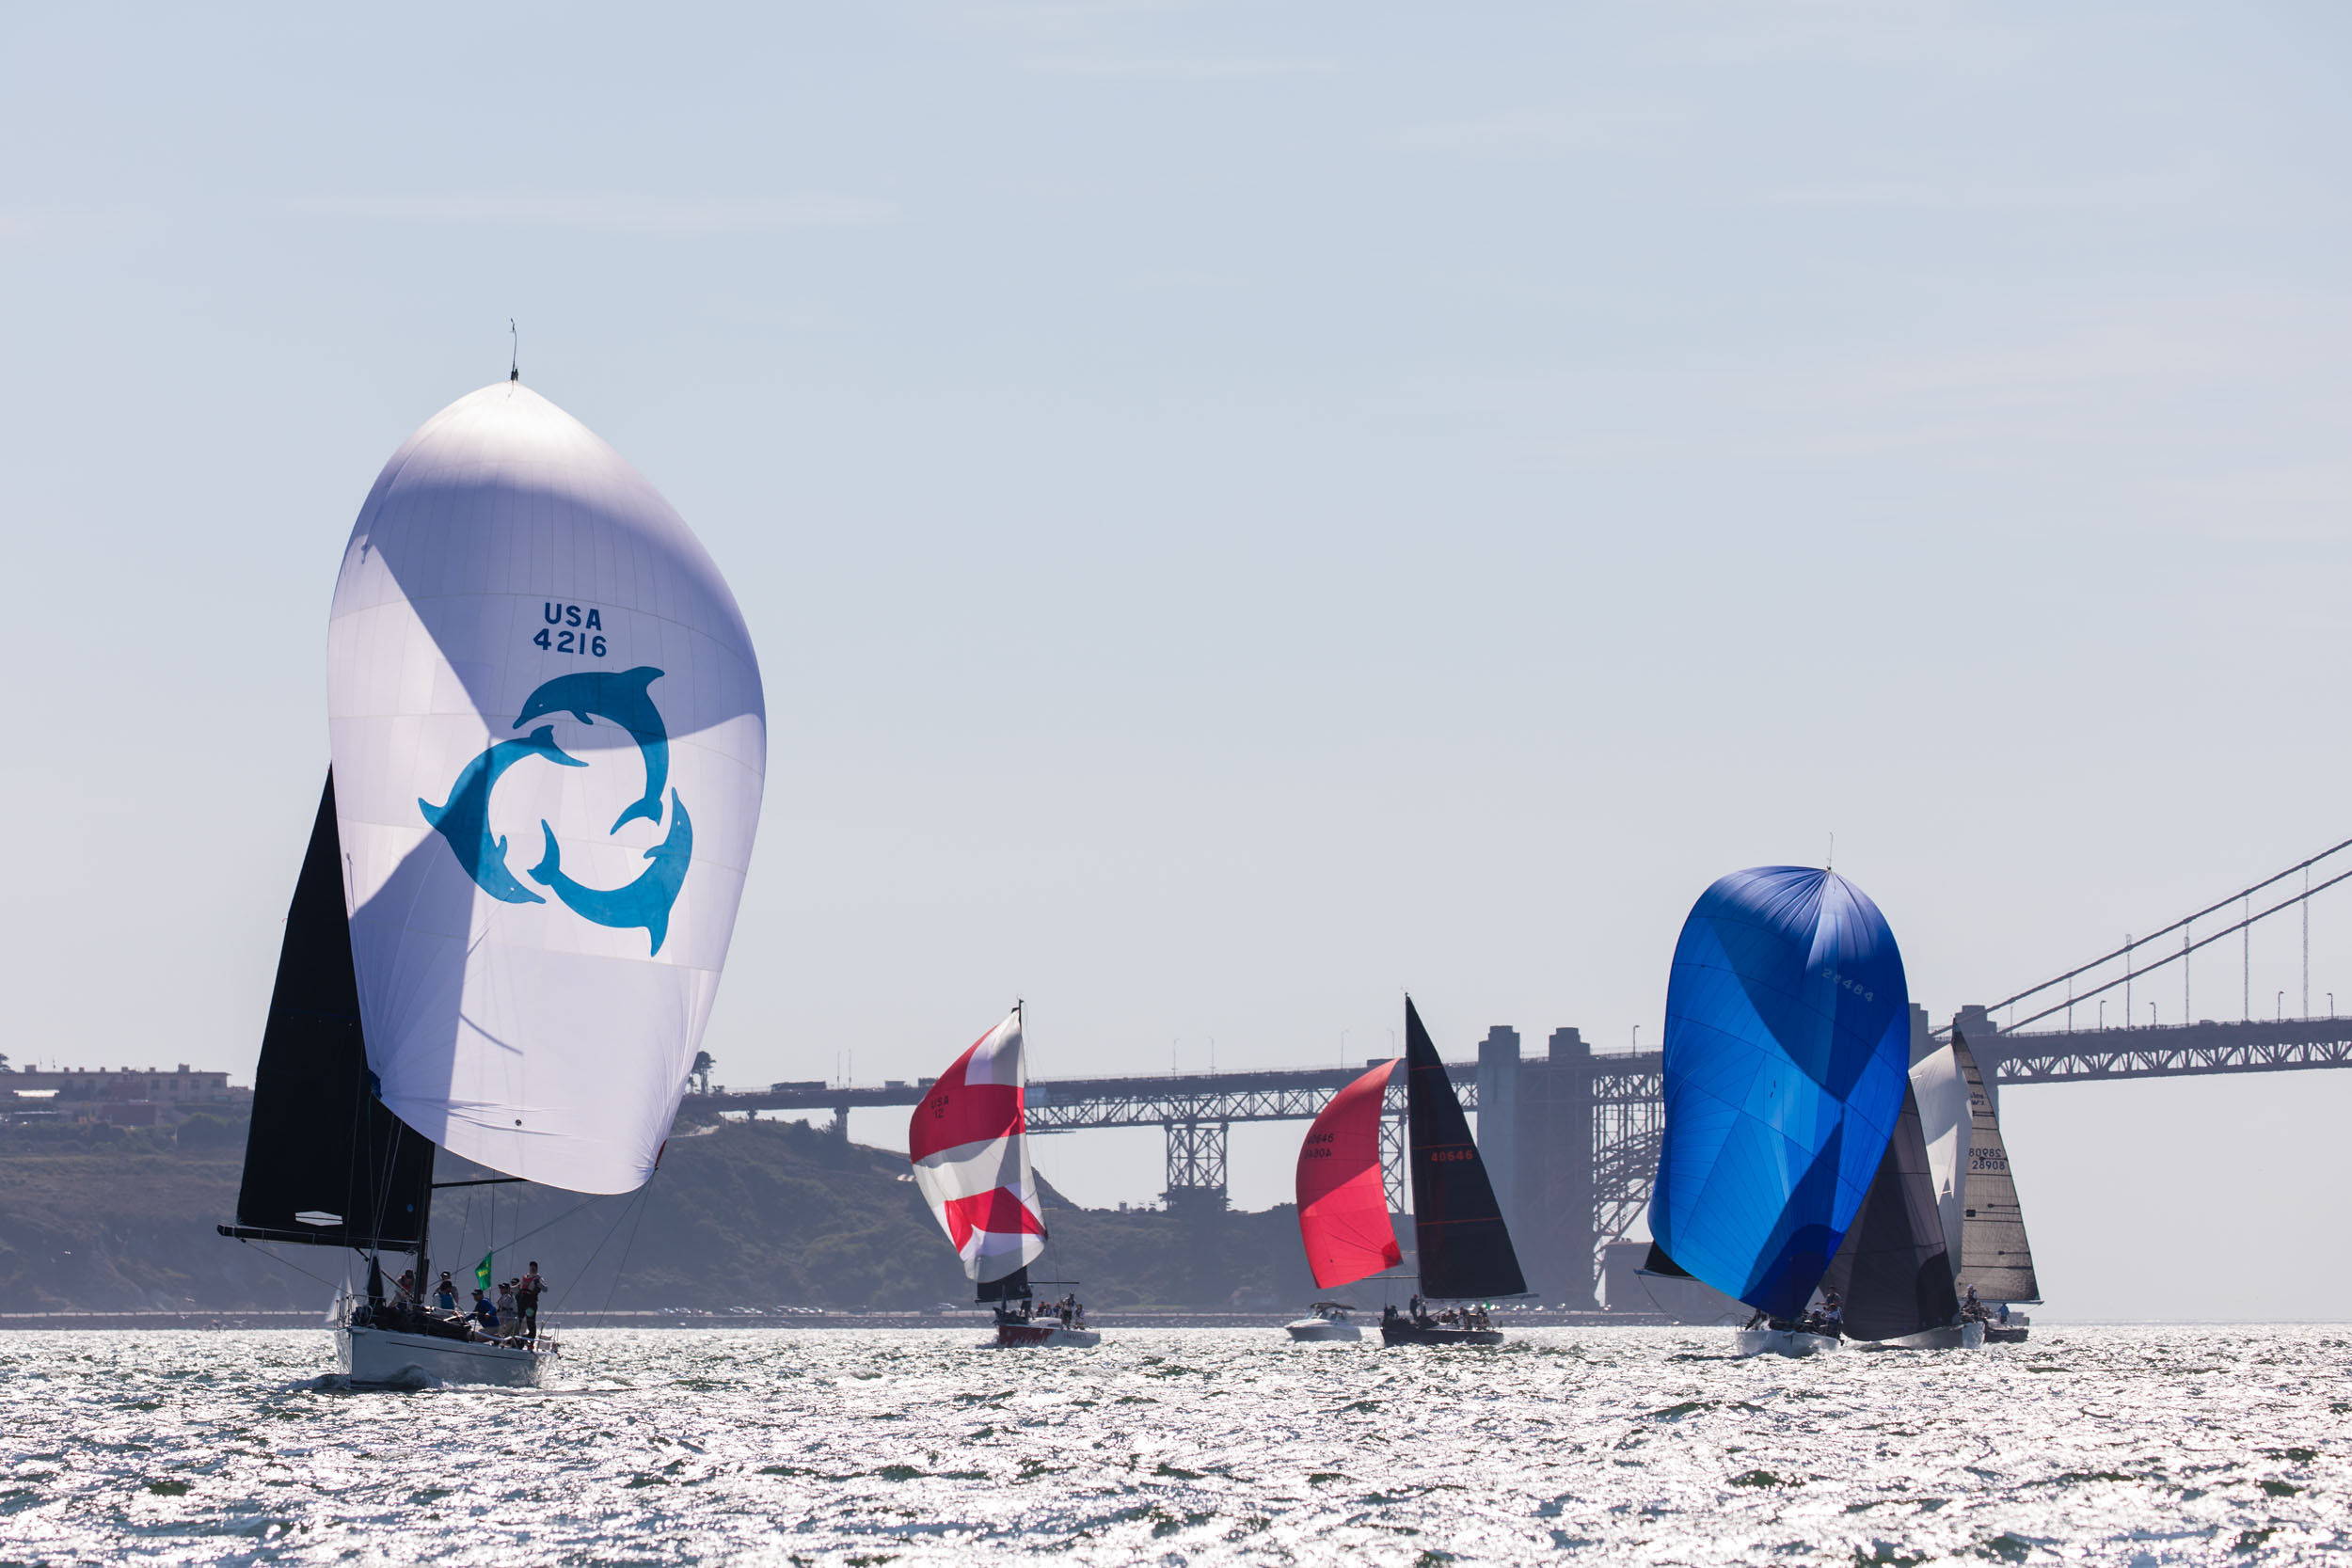  Various Classes  2019 Big Boat Series  San Francisco CA  Day 2, light winds, only two races so far 